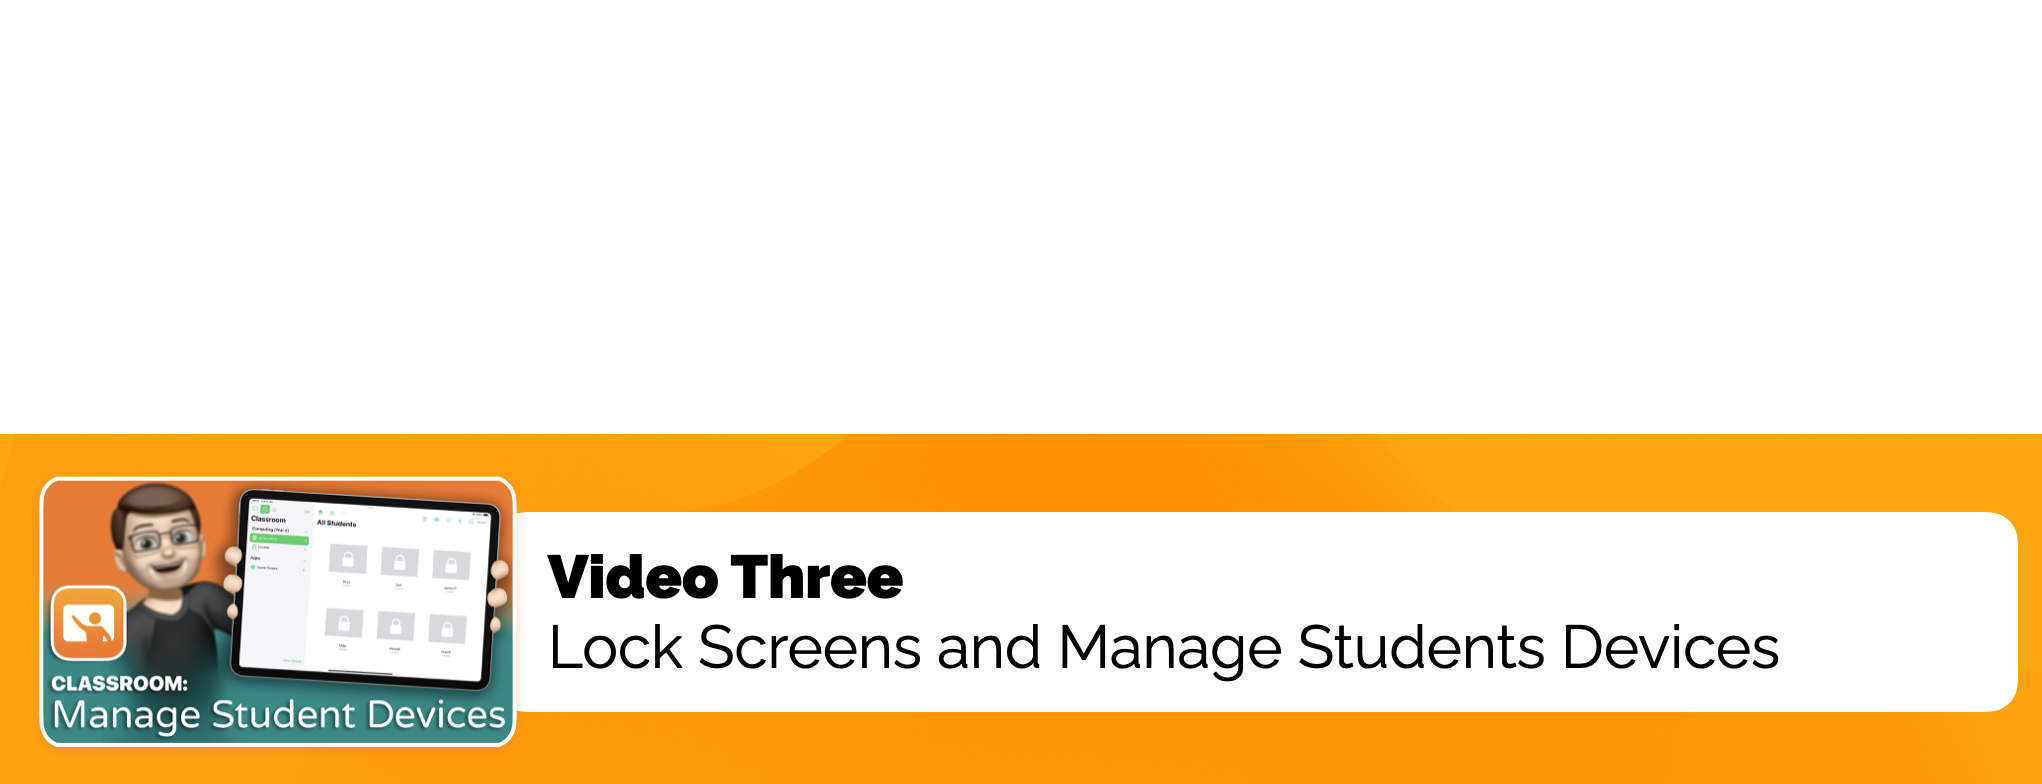 Video Three: Lock Screens and Manage Students Devices in Classroom